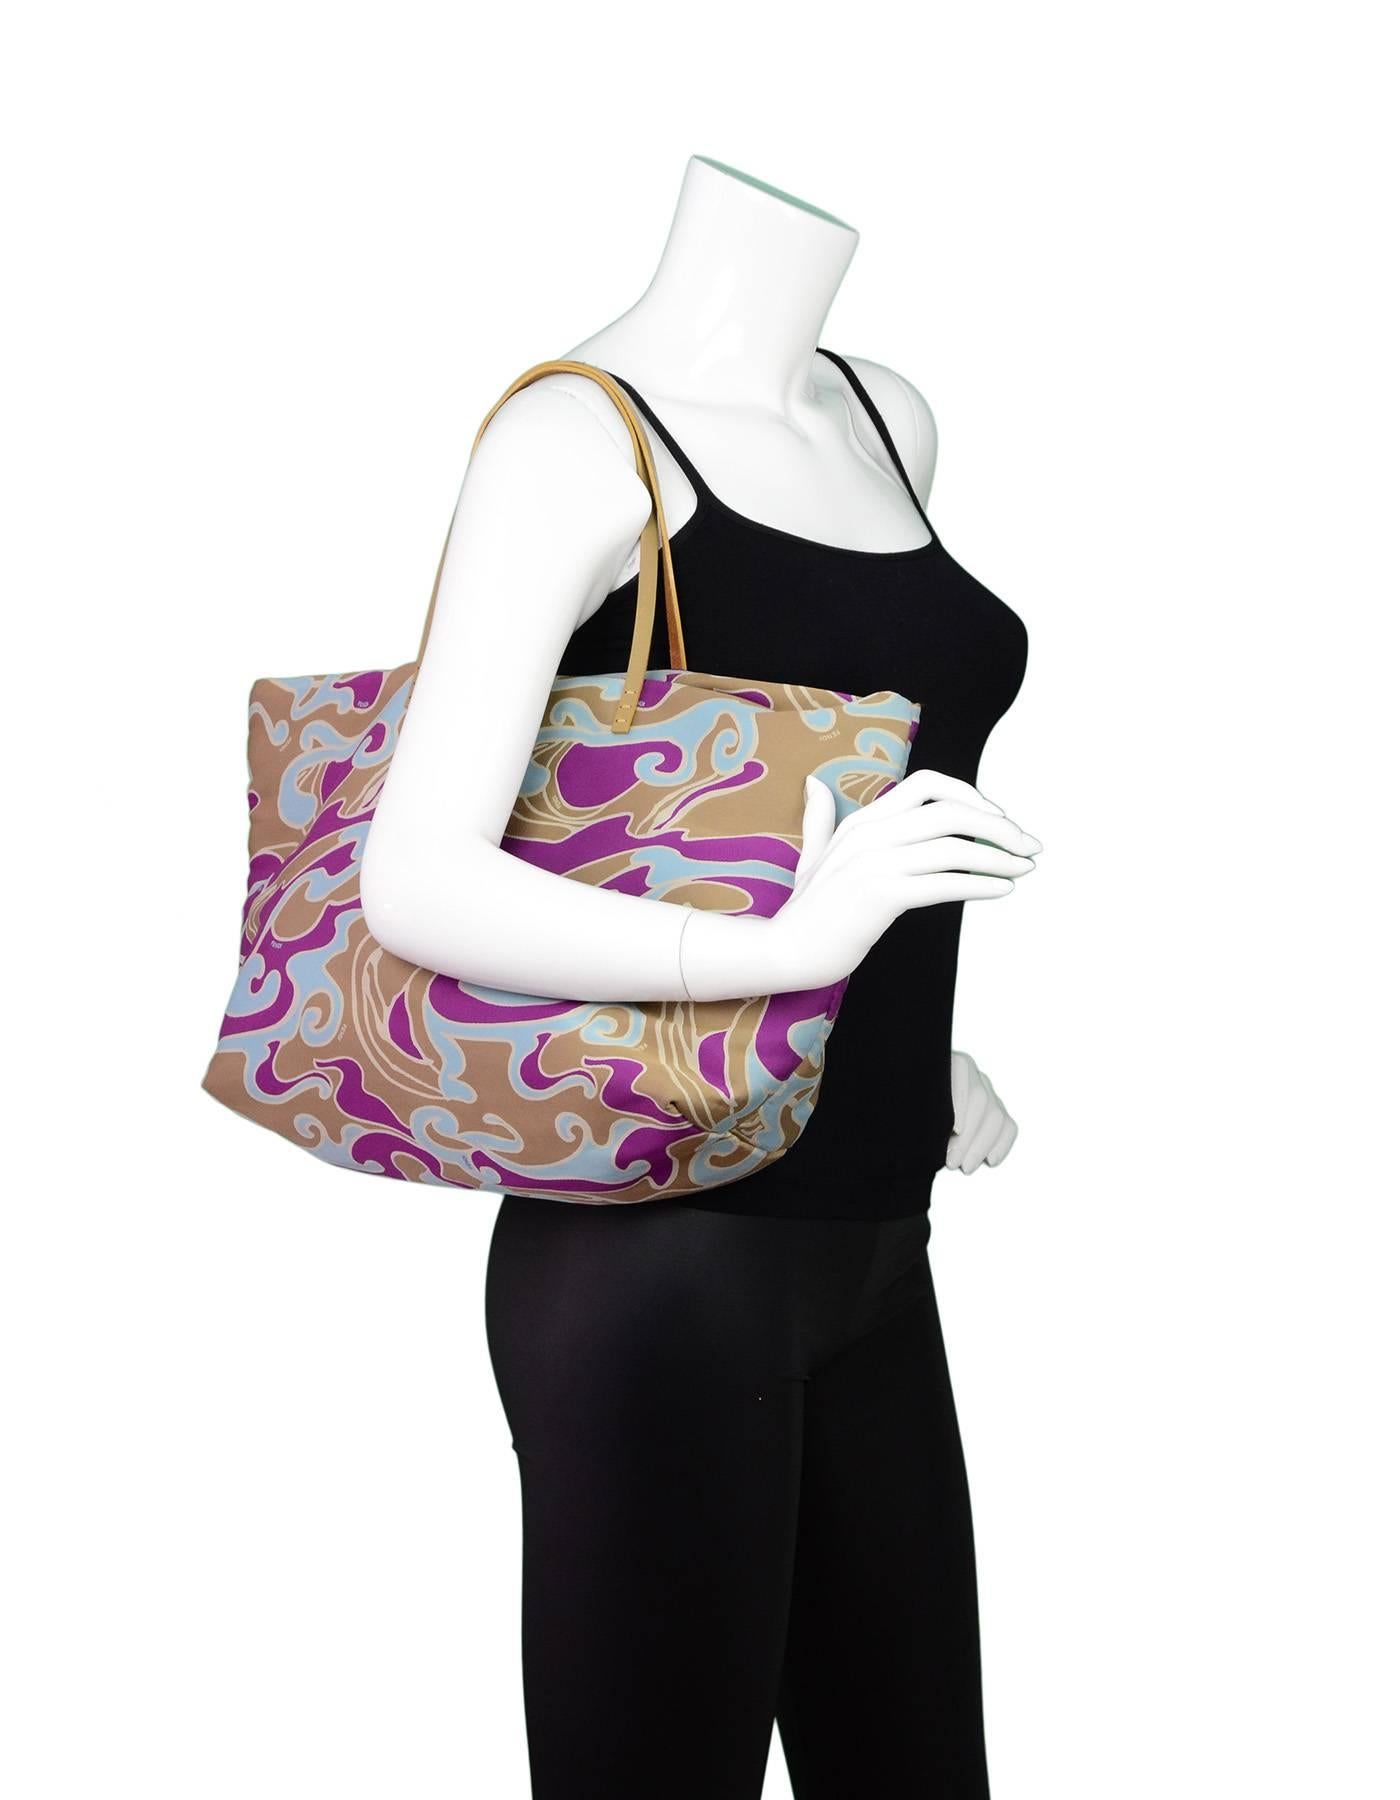 Fendi Multi-Color Abstract Print Tote Bag

Made In: Italy
Color: Purple, blue, taupe
Hardware: Goldtone
Materials: Sateen
Lining: Blue sateen
Closure/Opening: Open top with center snap
Exterior Pockets: None
Interior Pockets: One zip wall